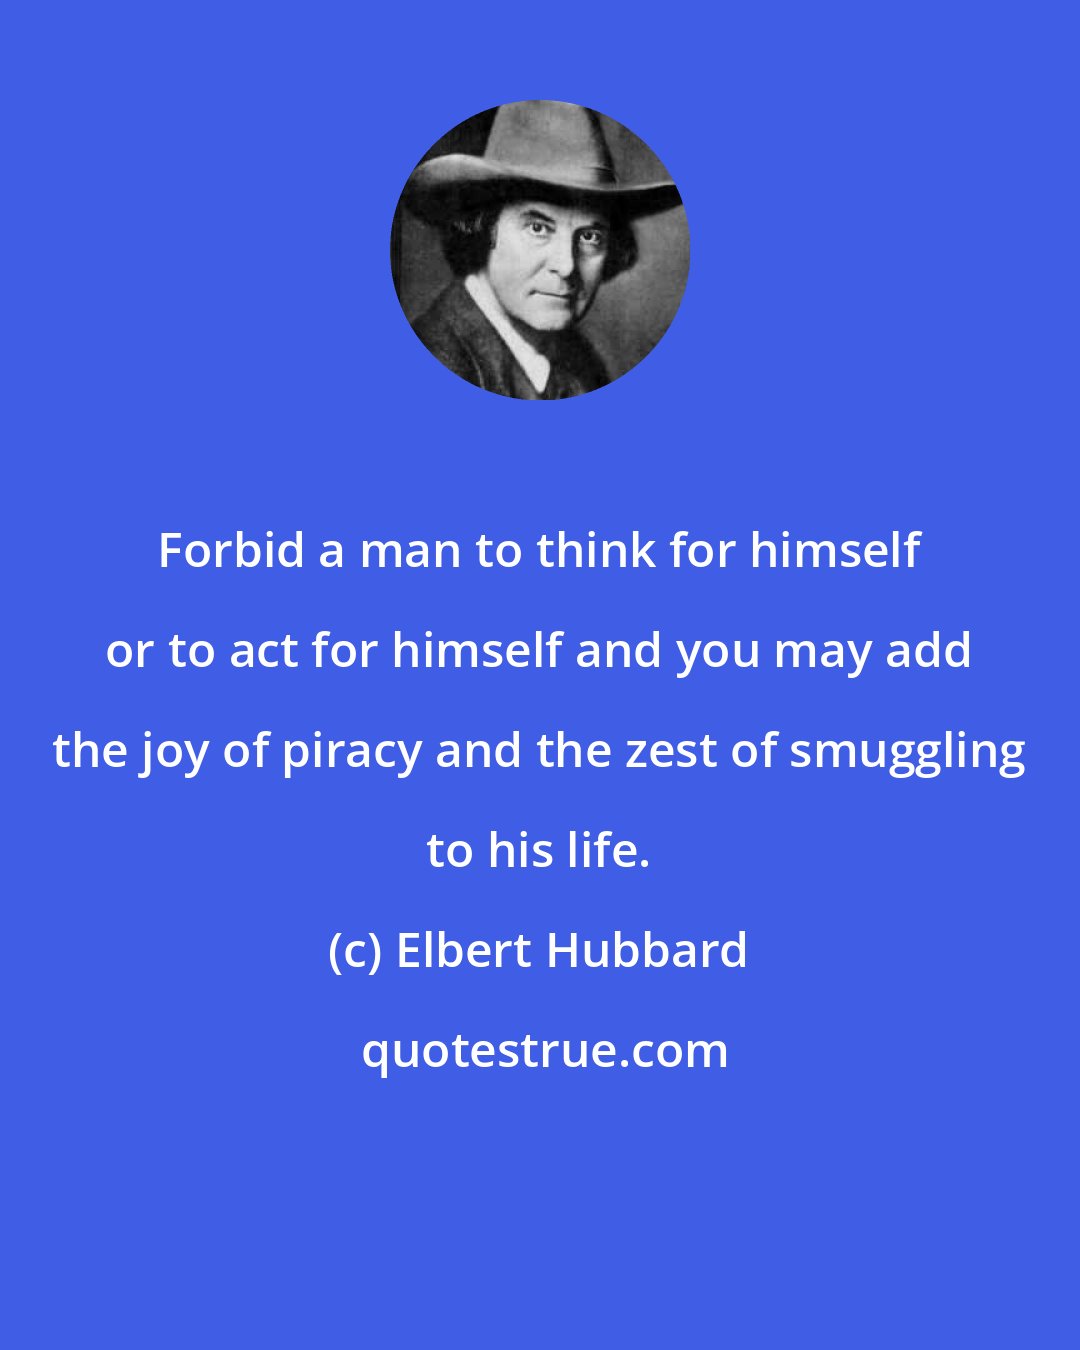 Elbert Hubbard: Forbid a man to think for himself or to act for himself and you may add the joy of piracy and the zest of smuggling to his life.